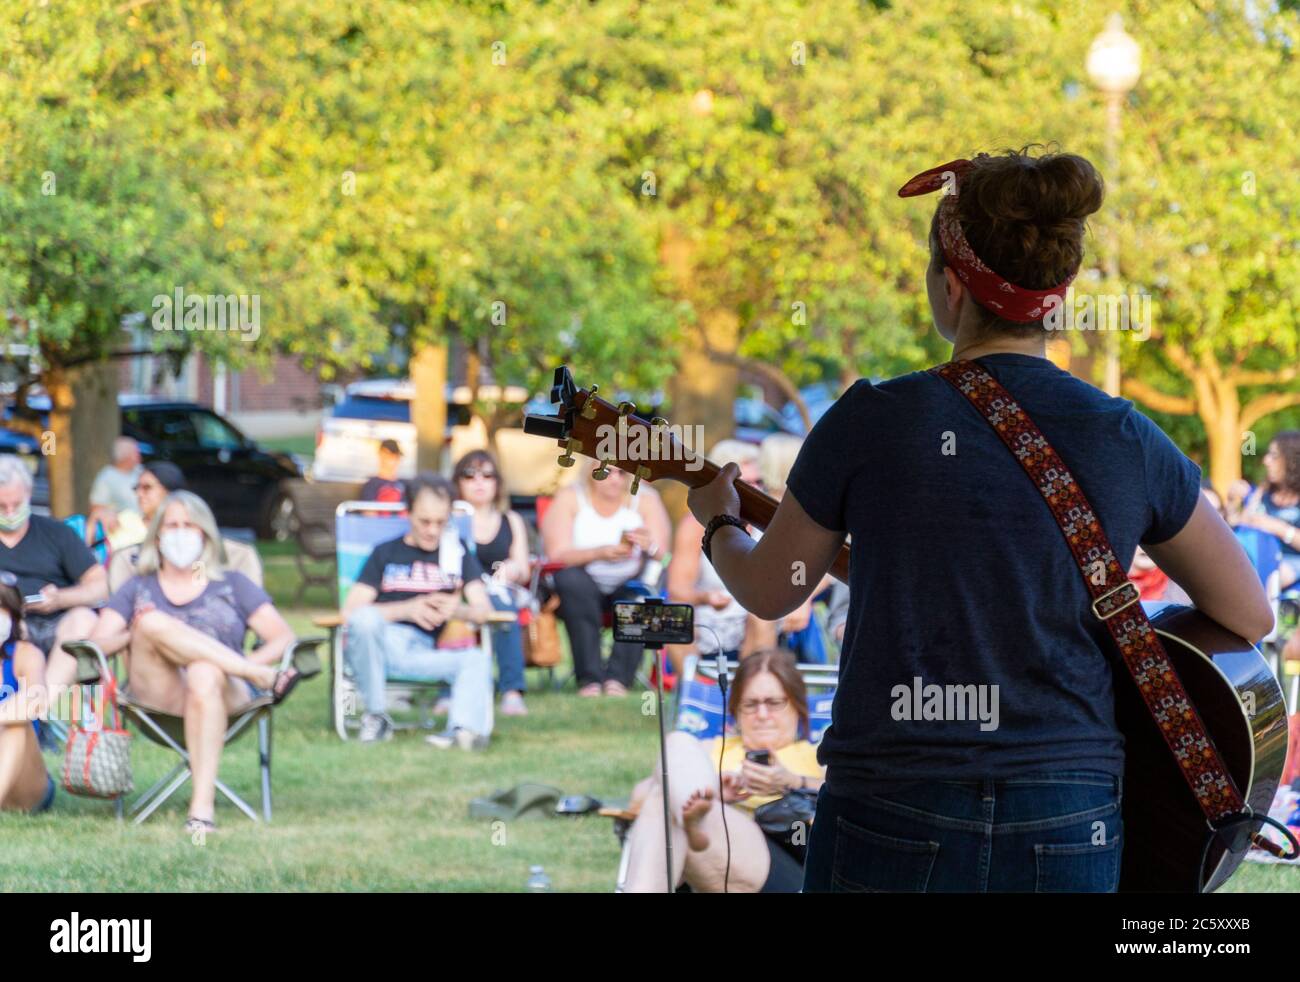 McGowan Park Summer Concerts - Sandy Stones Trio Band - Woman playing guitar in front of coronavirus crowd Stock Photo